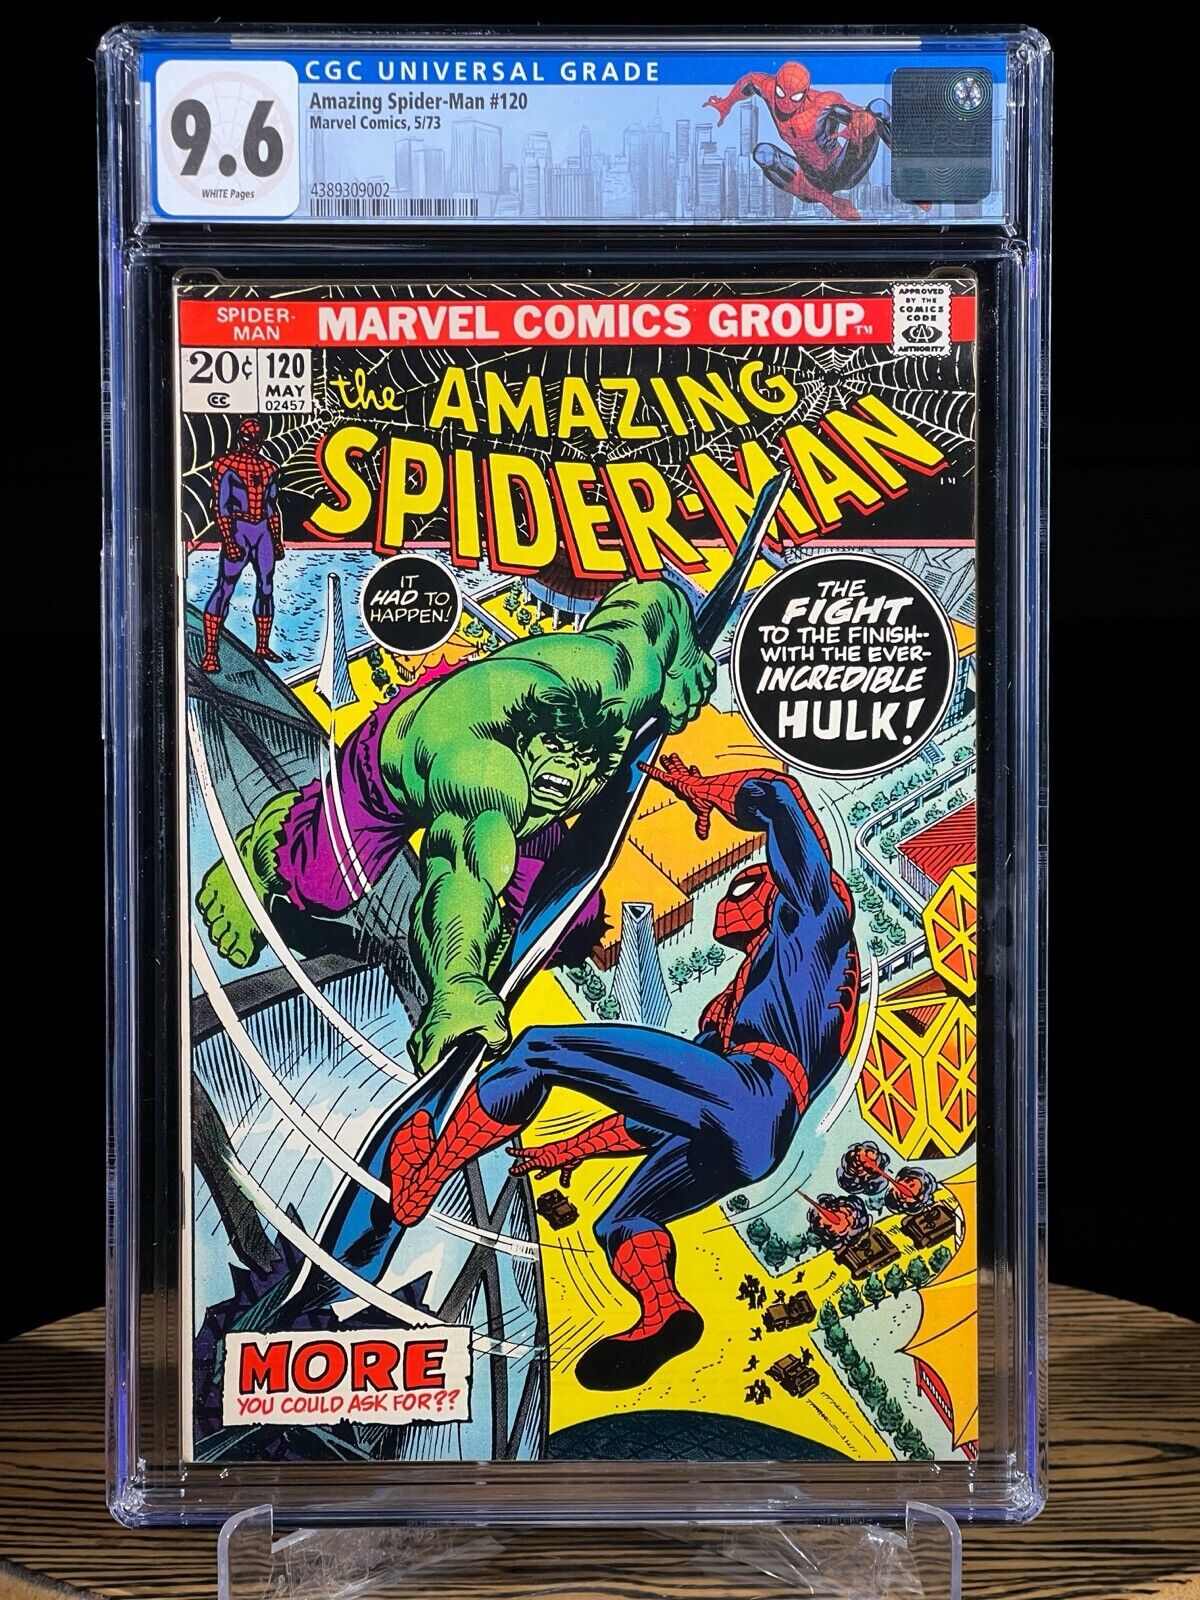 AMAZING SPIDER-MAN #120 May 1973 CGC 9.6 White Pages Hulk Battle KEY ISSUE